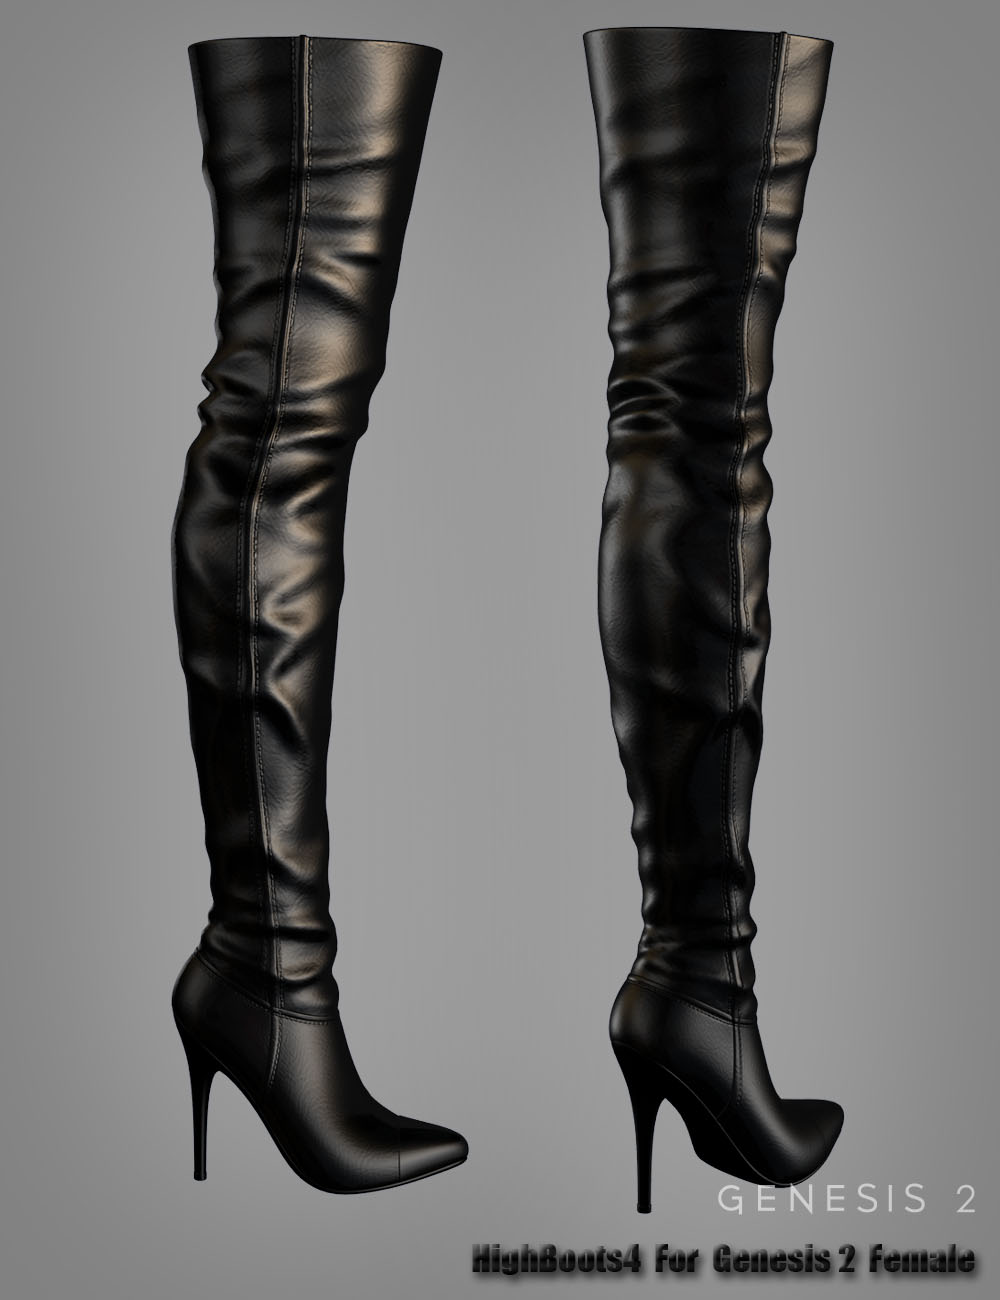 High Boots 4 For Genesis 2 Female(s) by: dx30, 3D Models by Daz 3D